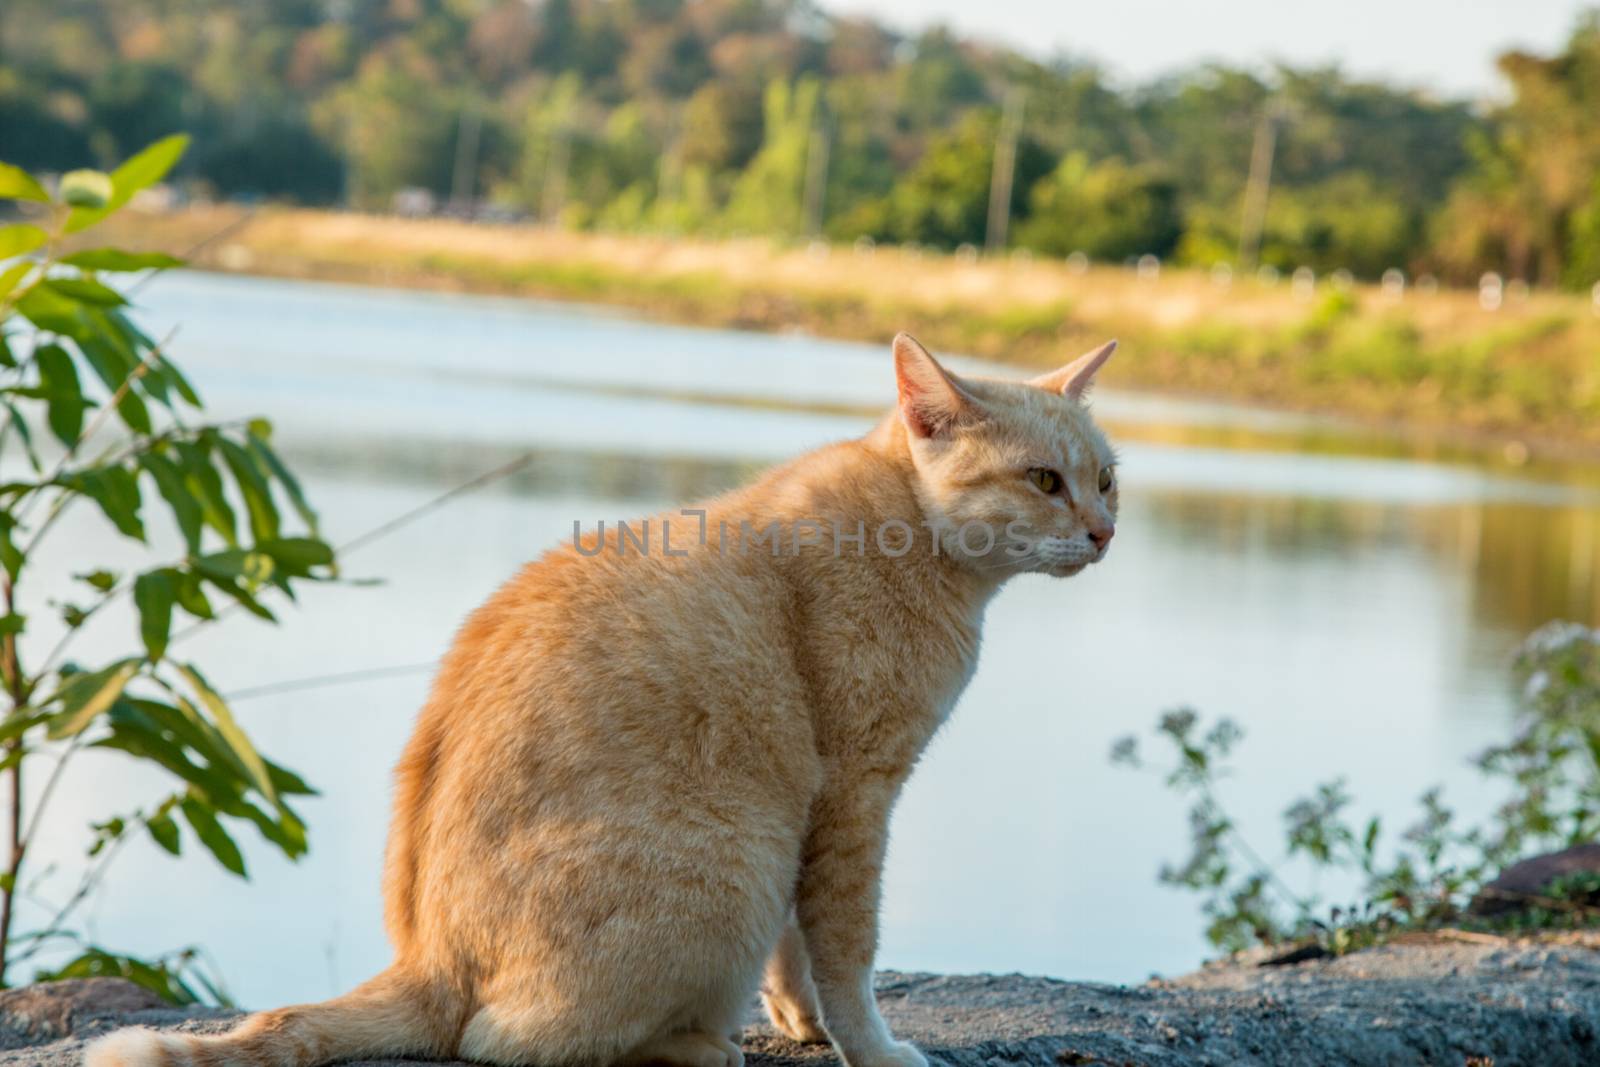 Cats that live in the park's nature.